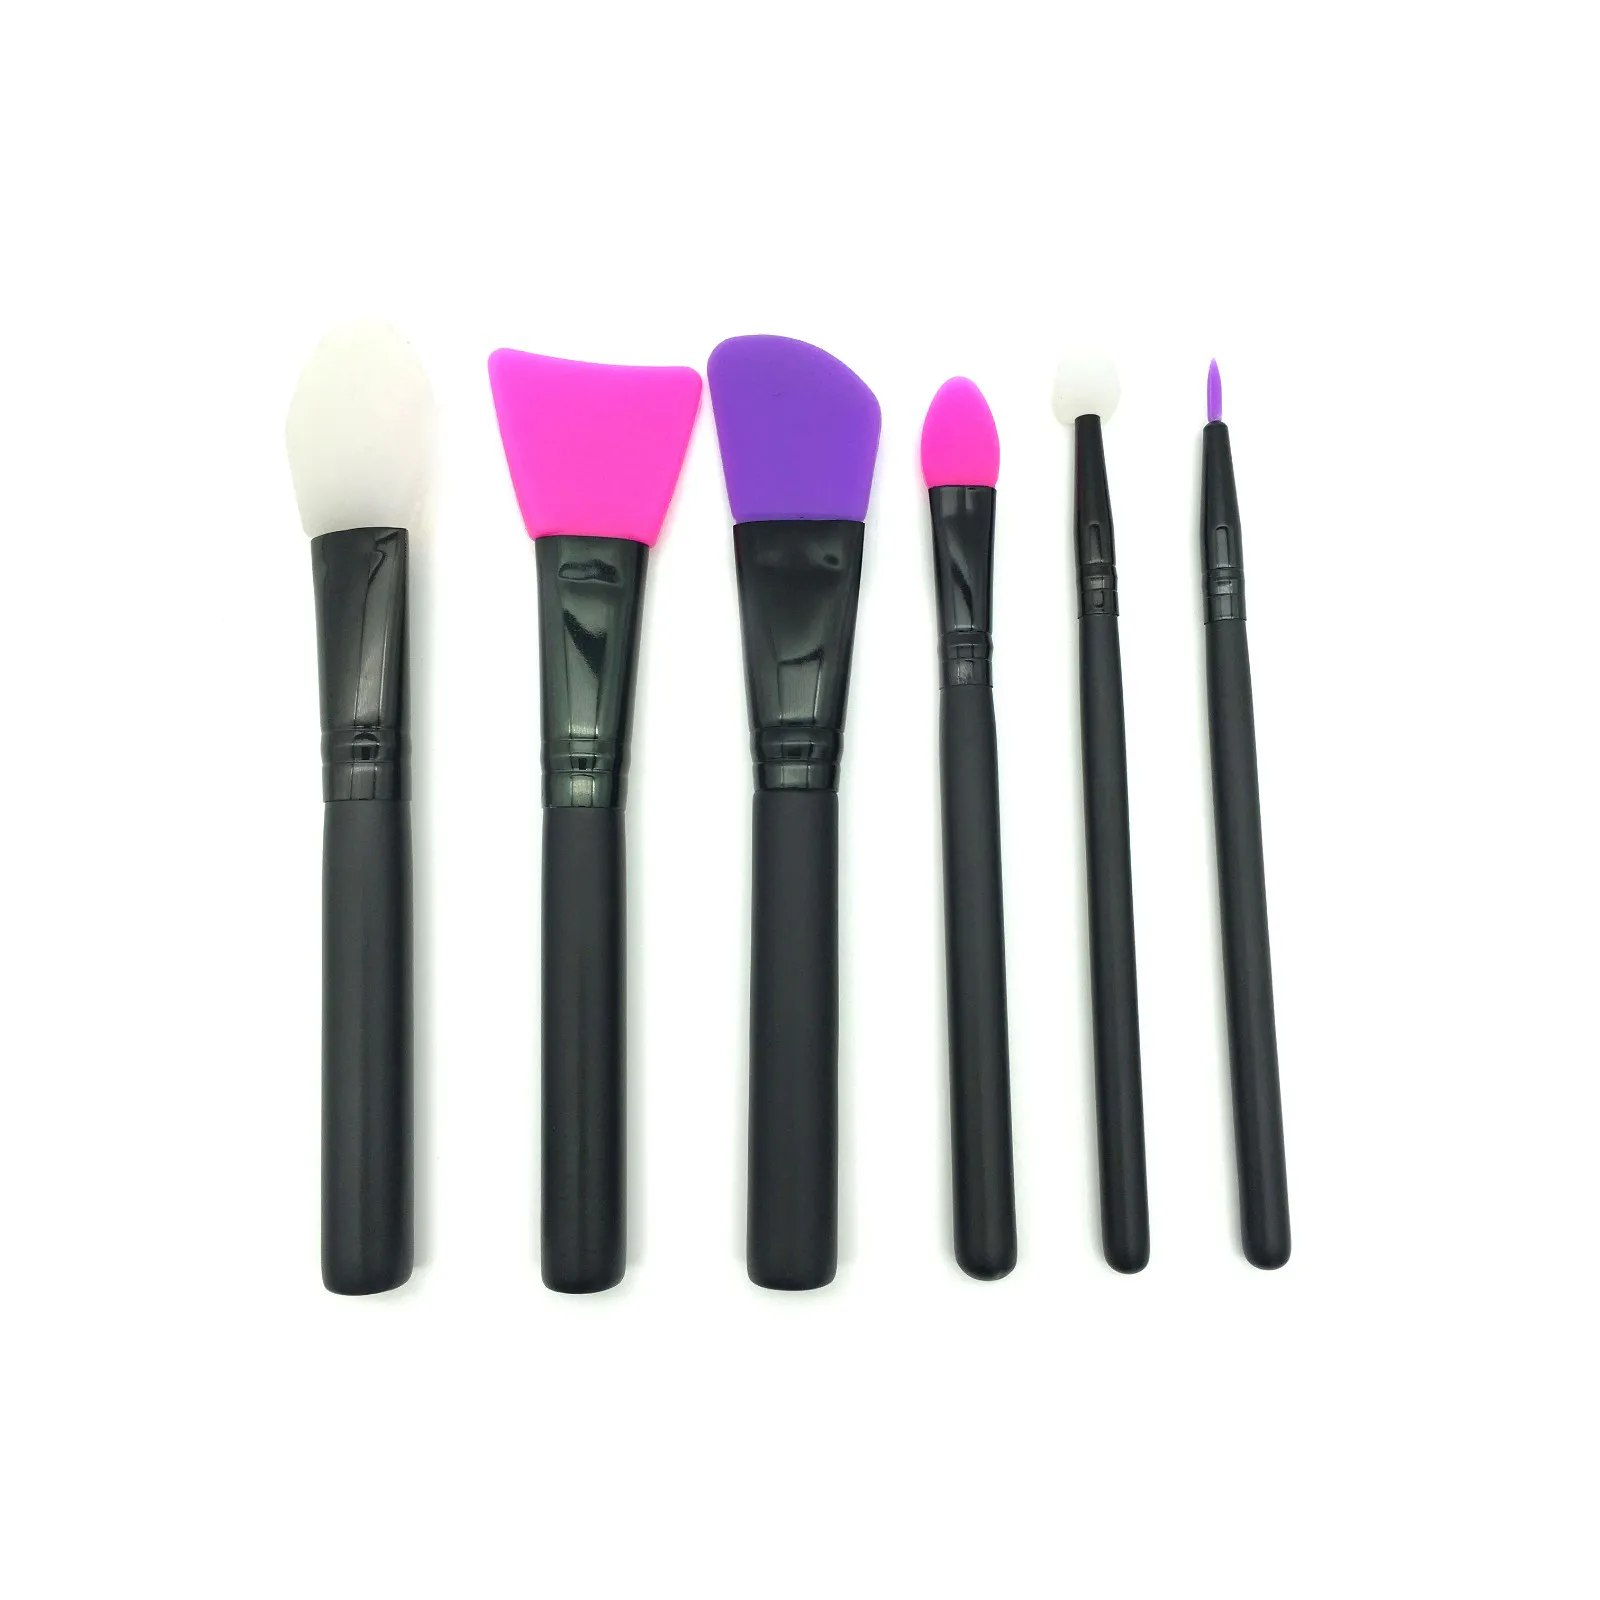 Suprabeauty contouring basic different makeup brushes spn for loose powder